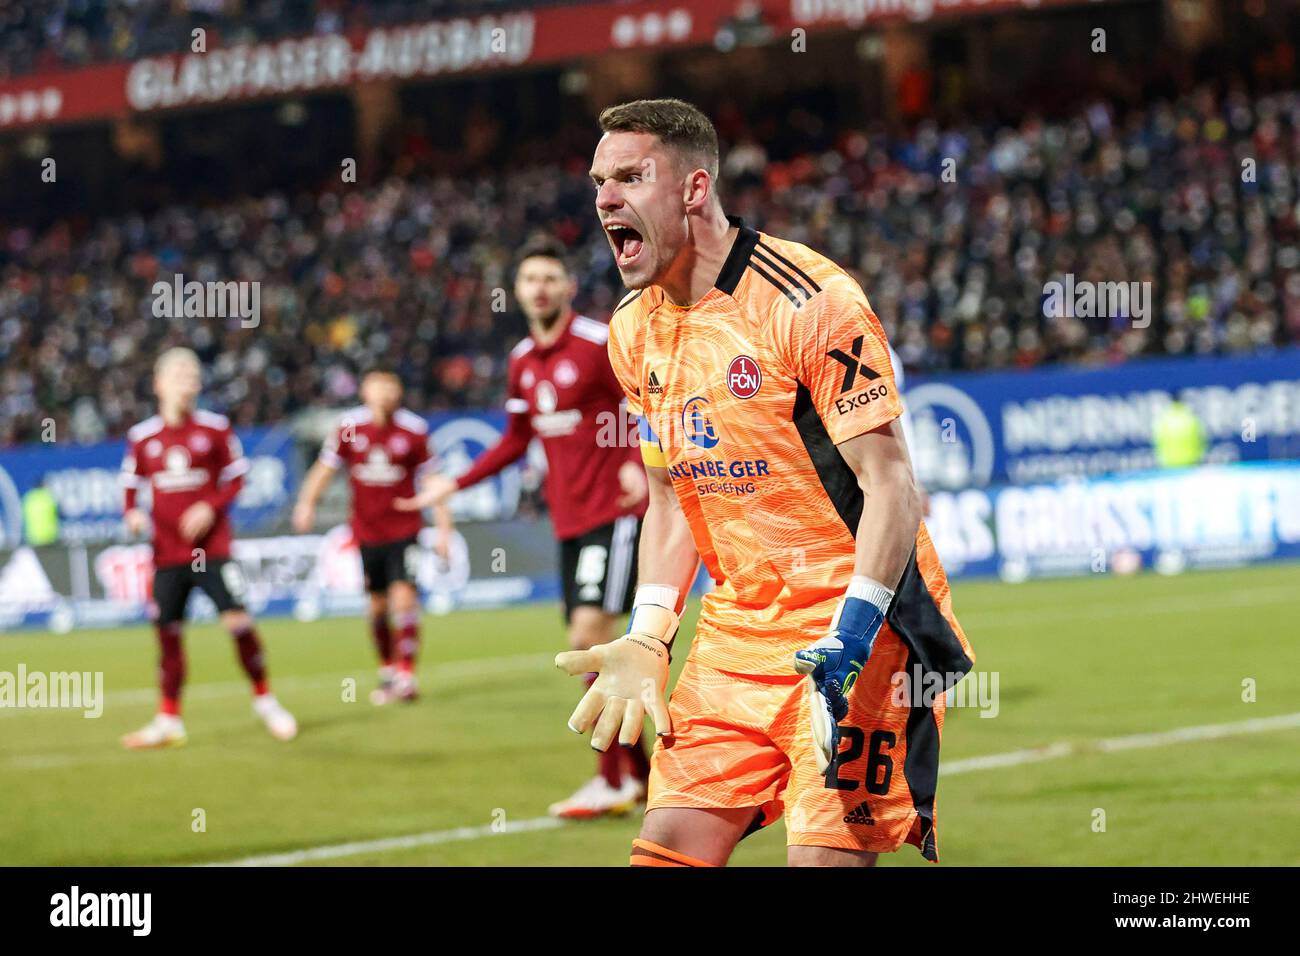 Nuremberg, Germany. 05th Mar, 2022. Soccer: 2. Bundesliga, 1. FC Nürnberg - Hamburger SV, Matchday 25, at Max-Morlock-Stadion, Nürnberg's goalkeeper Christian Mathenia scolds towards the linesman. Credit: Löb Daniel/dpa - IMPORTANT NOTE: In accordance with the requirements of the DFL Deutsche Fußball Liga and the DFB Deutscher Fußball-Bund, it is prohibited to use or have used photographs taken in the stadium and/or of the match in the form of sequence pictures and/or video-like photo series./dpa/Alamy Live News Stock Photo